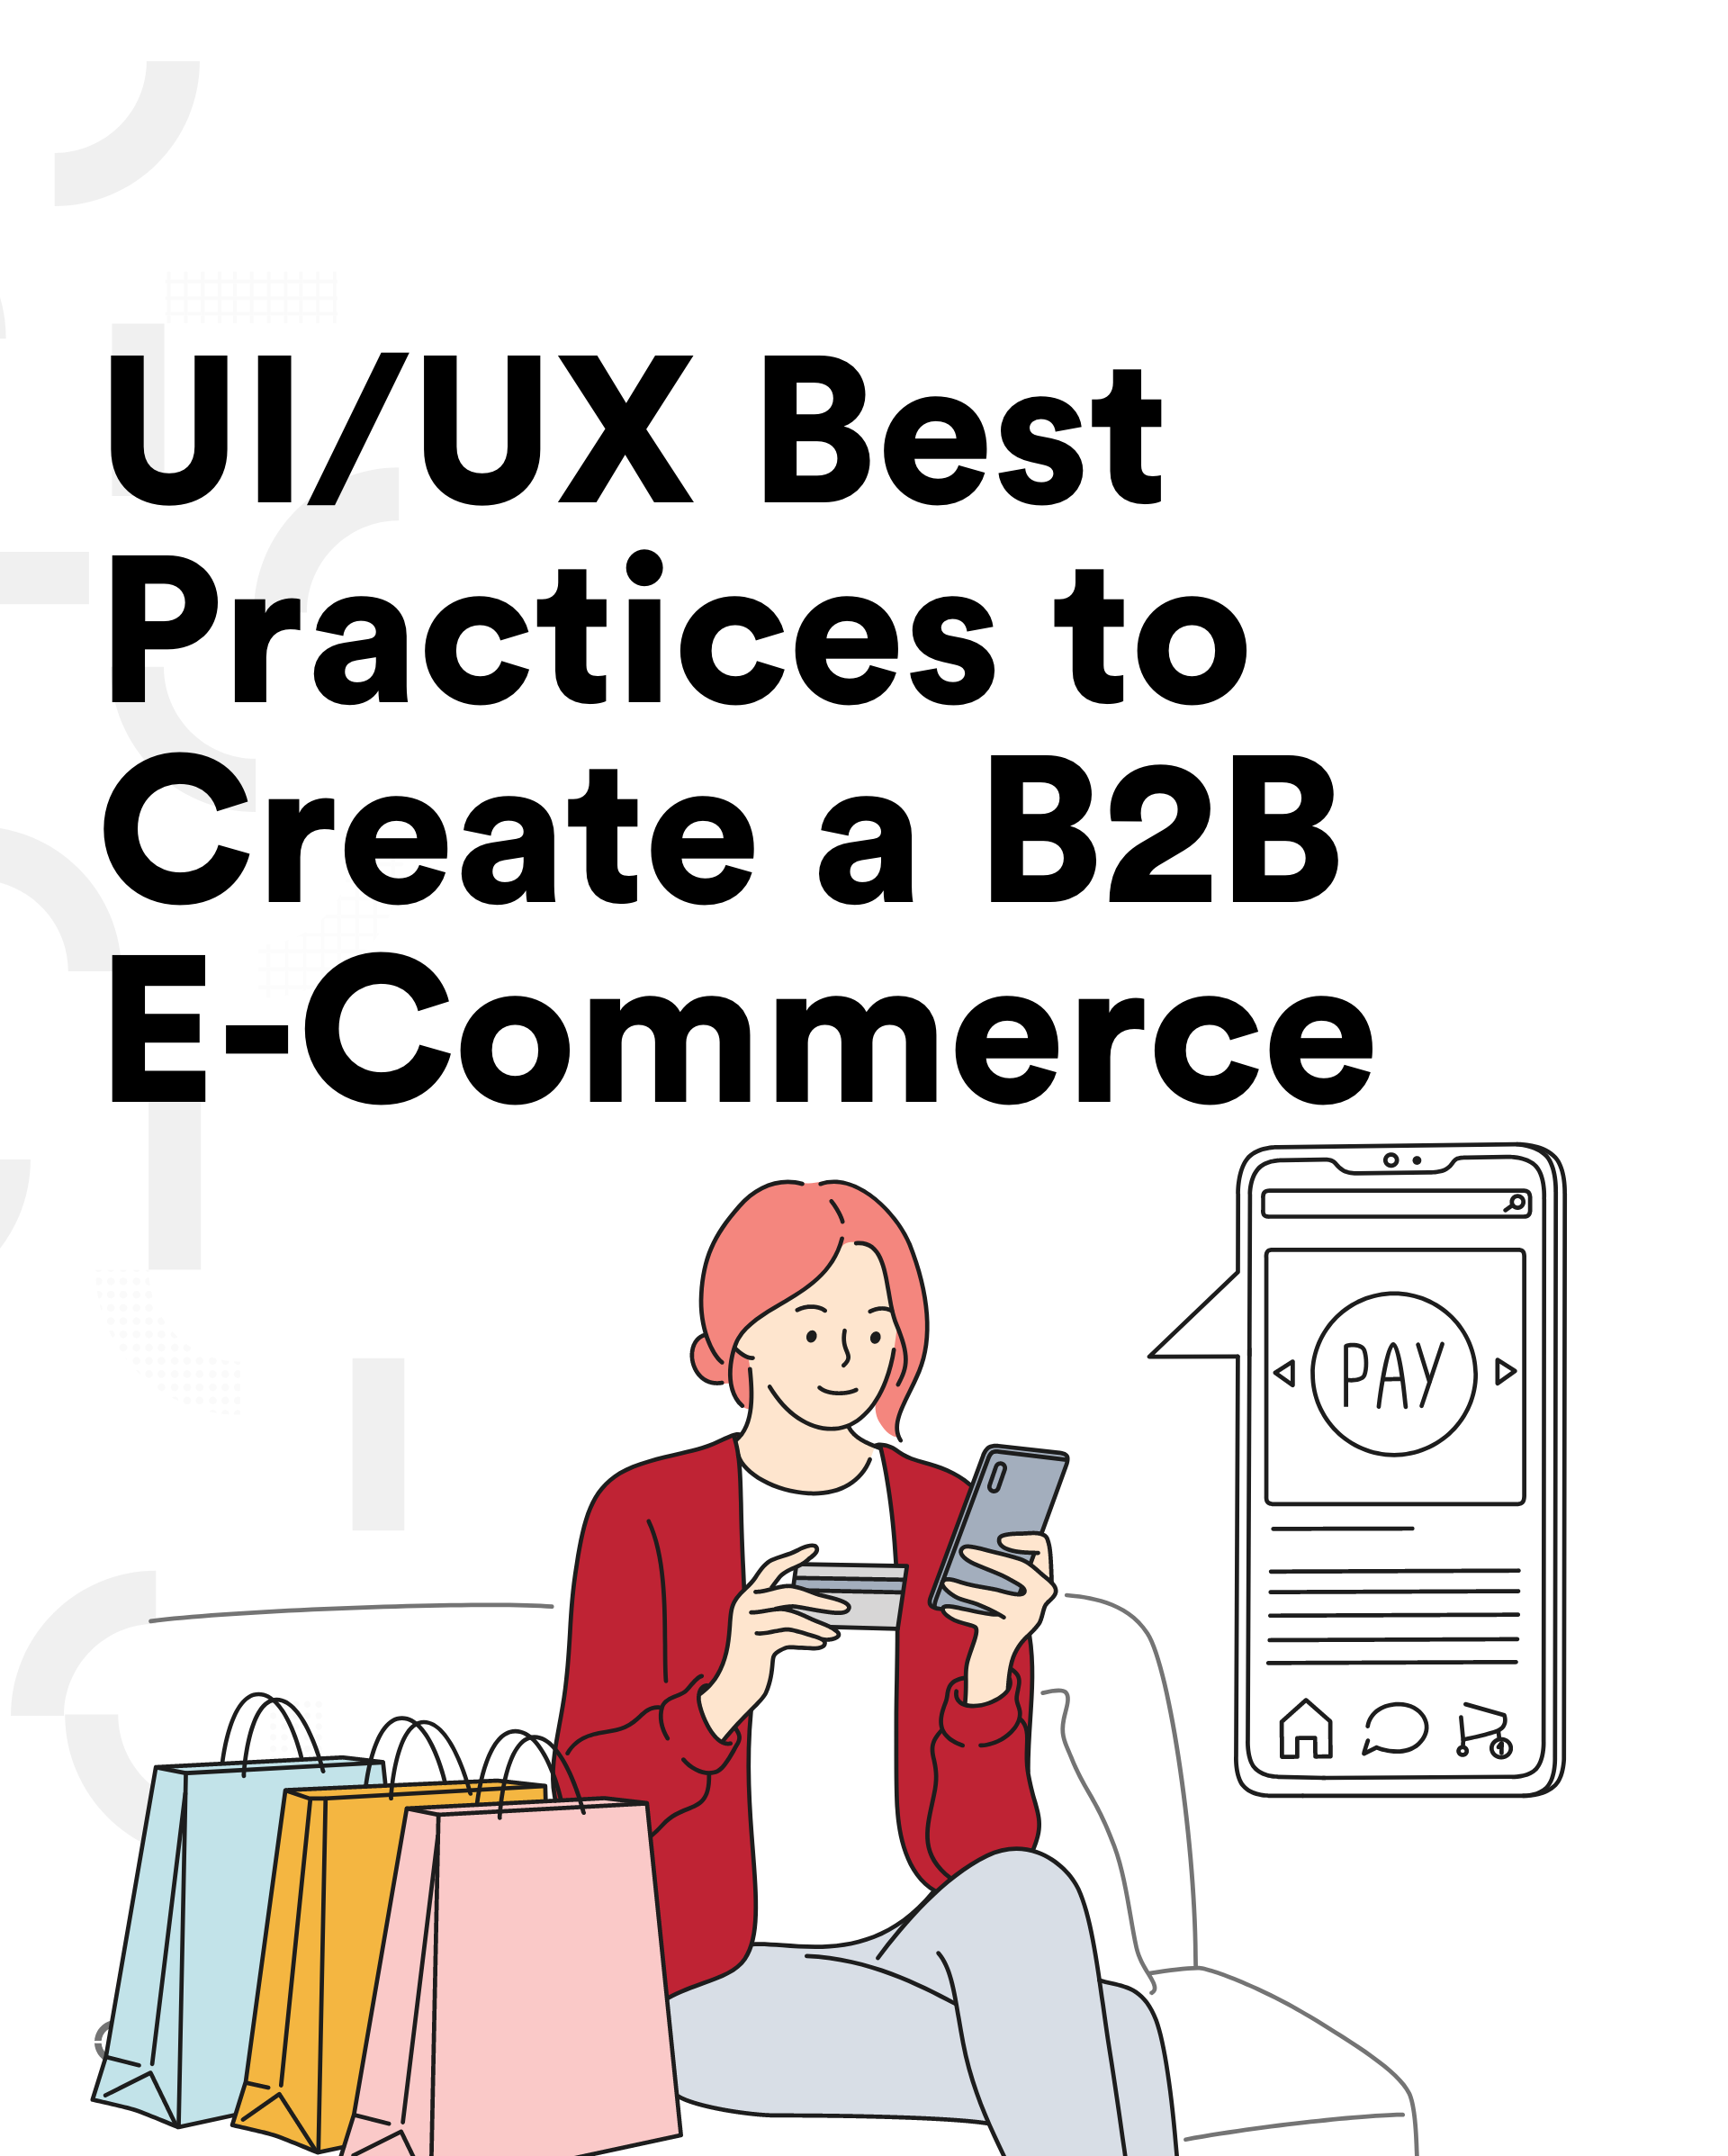 UI/UX Best Practices to Create a B2B E-Commerce